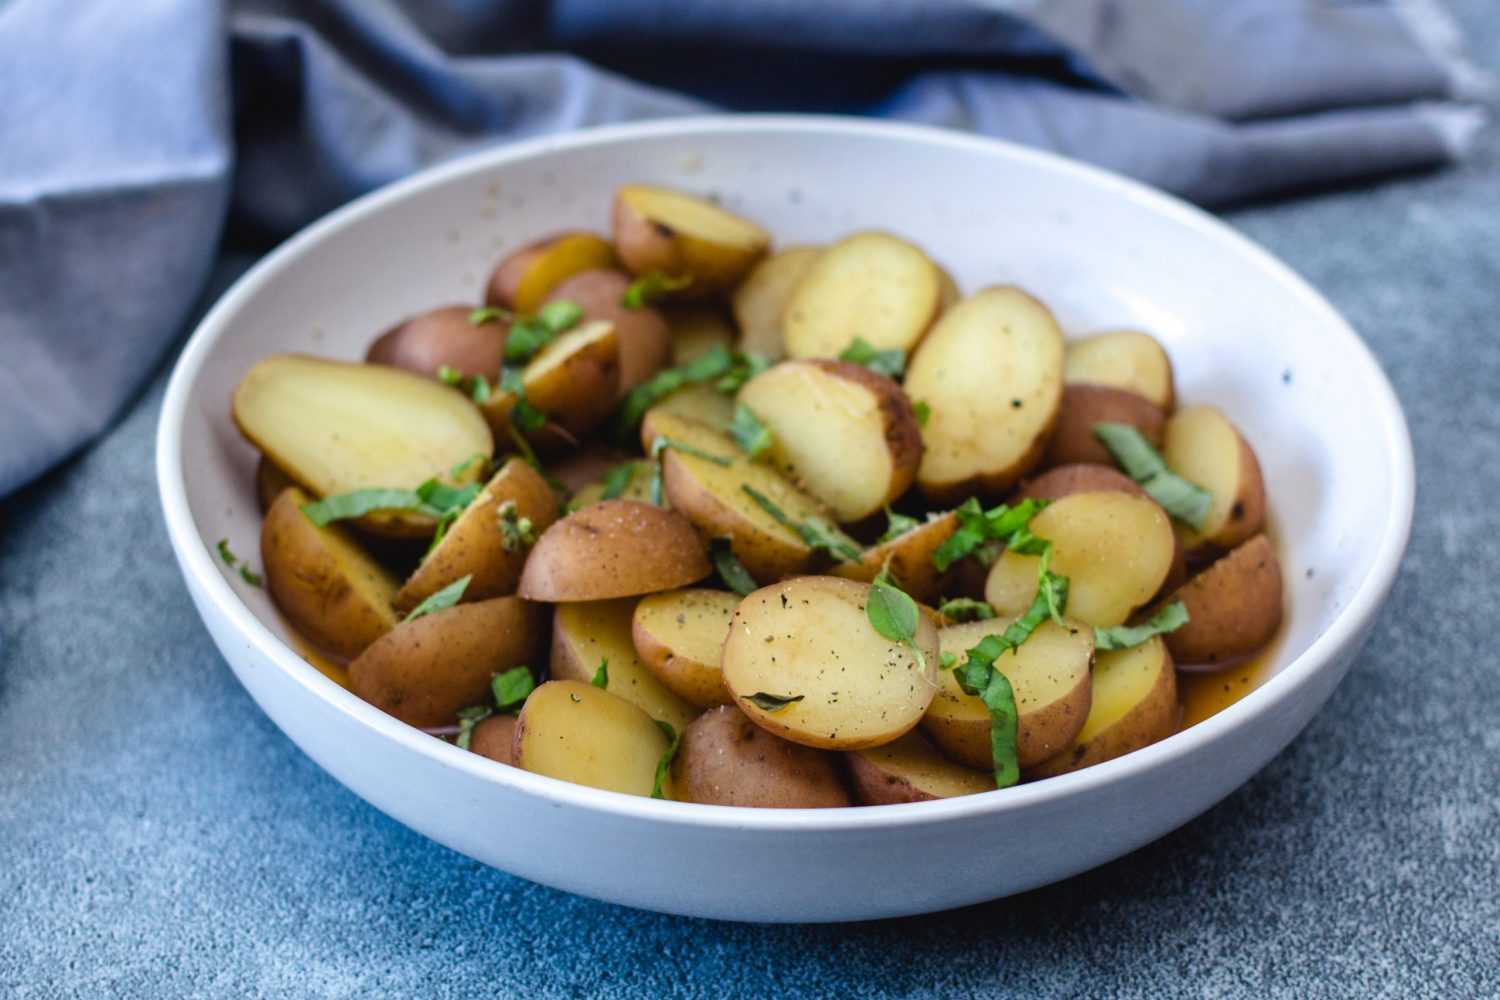 Halved red potatoes with skin topped with parsley, salt and pepper in white bowl